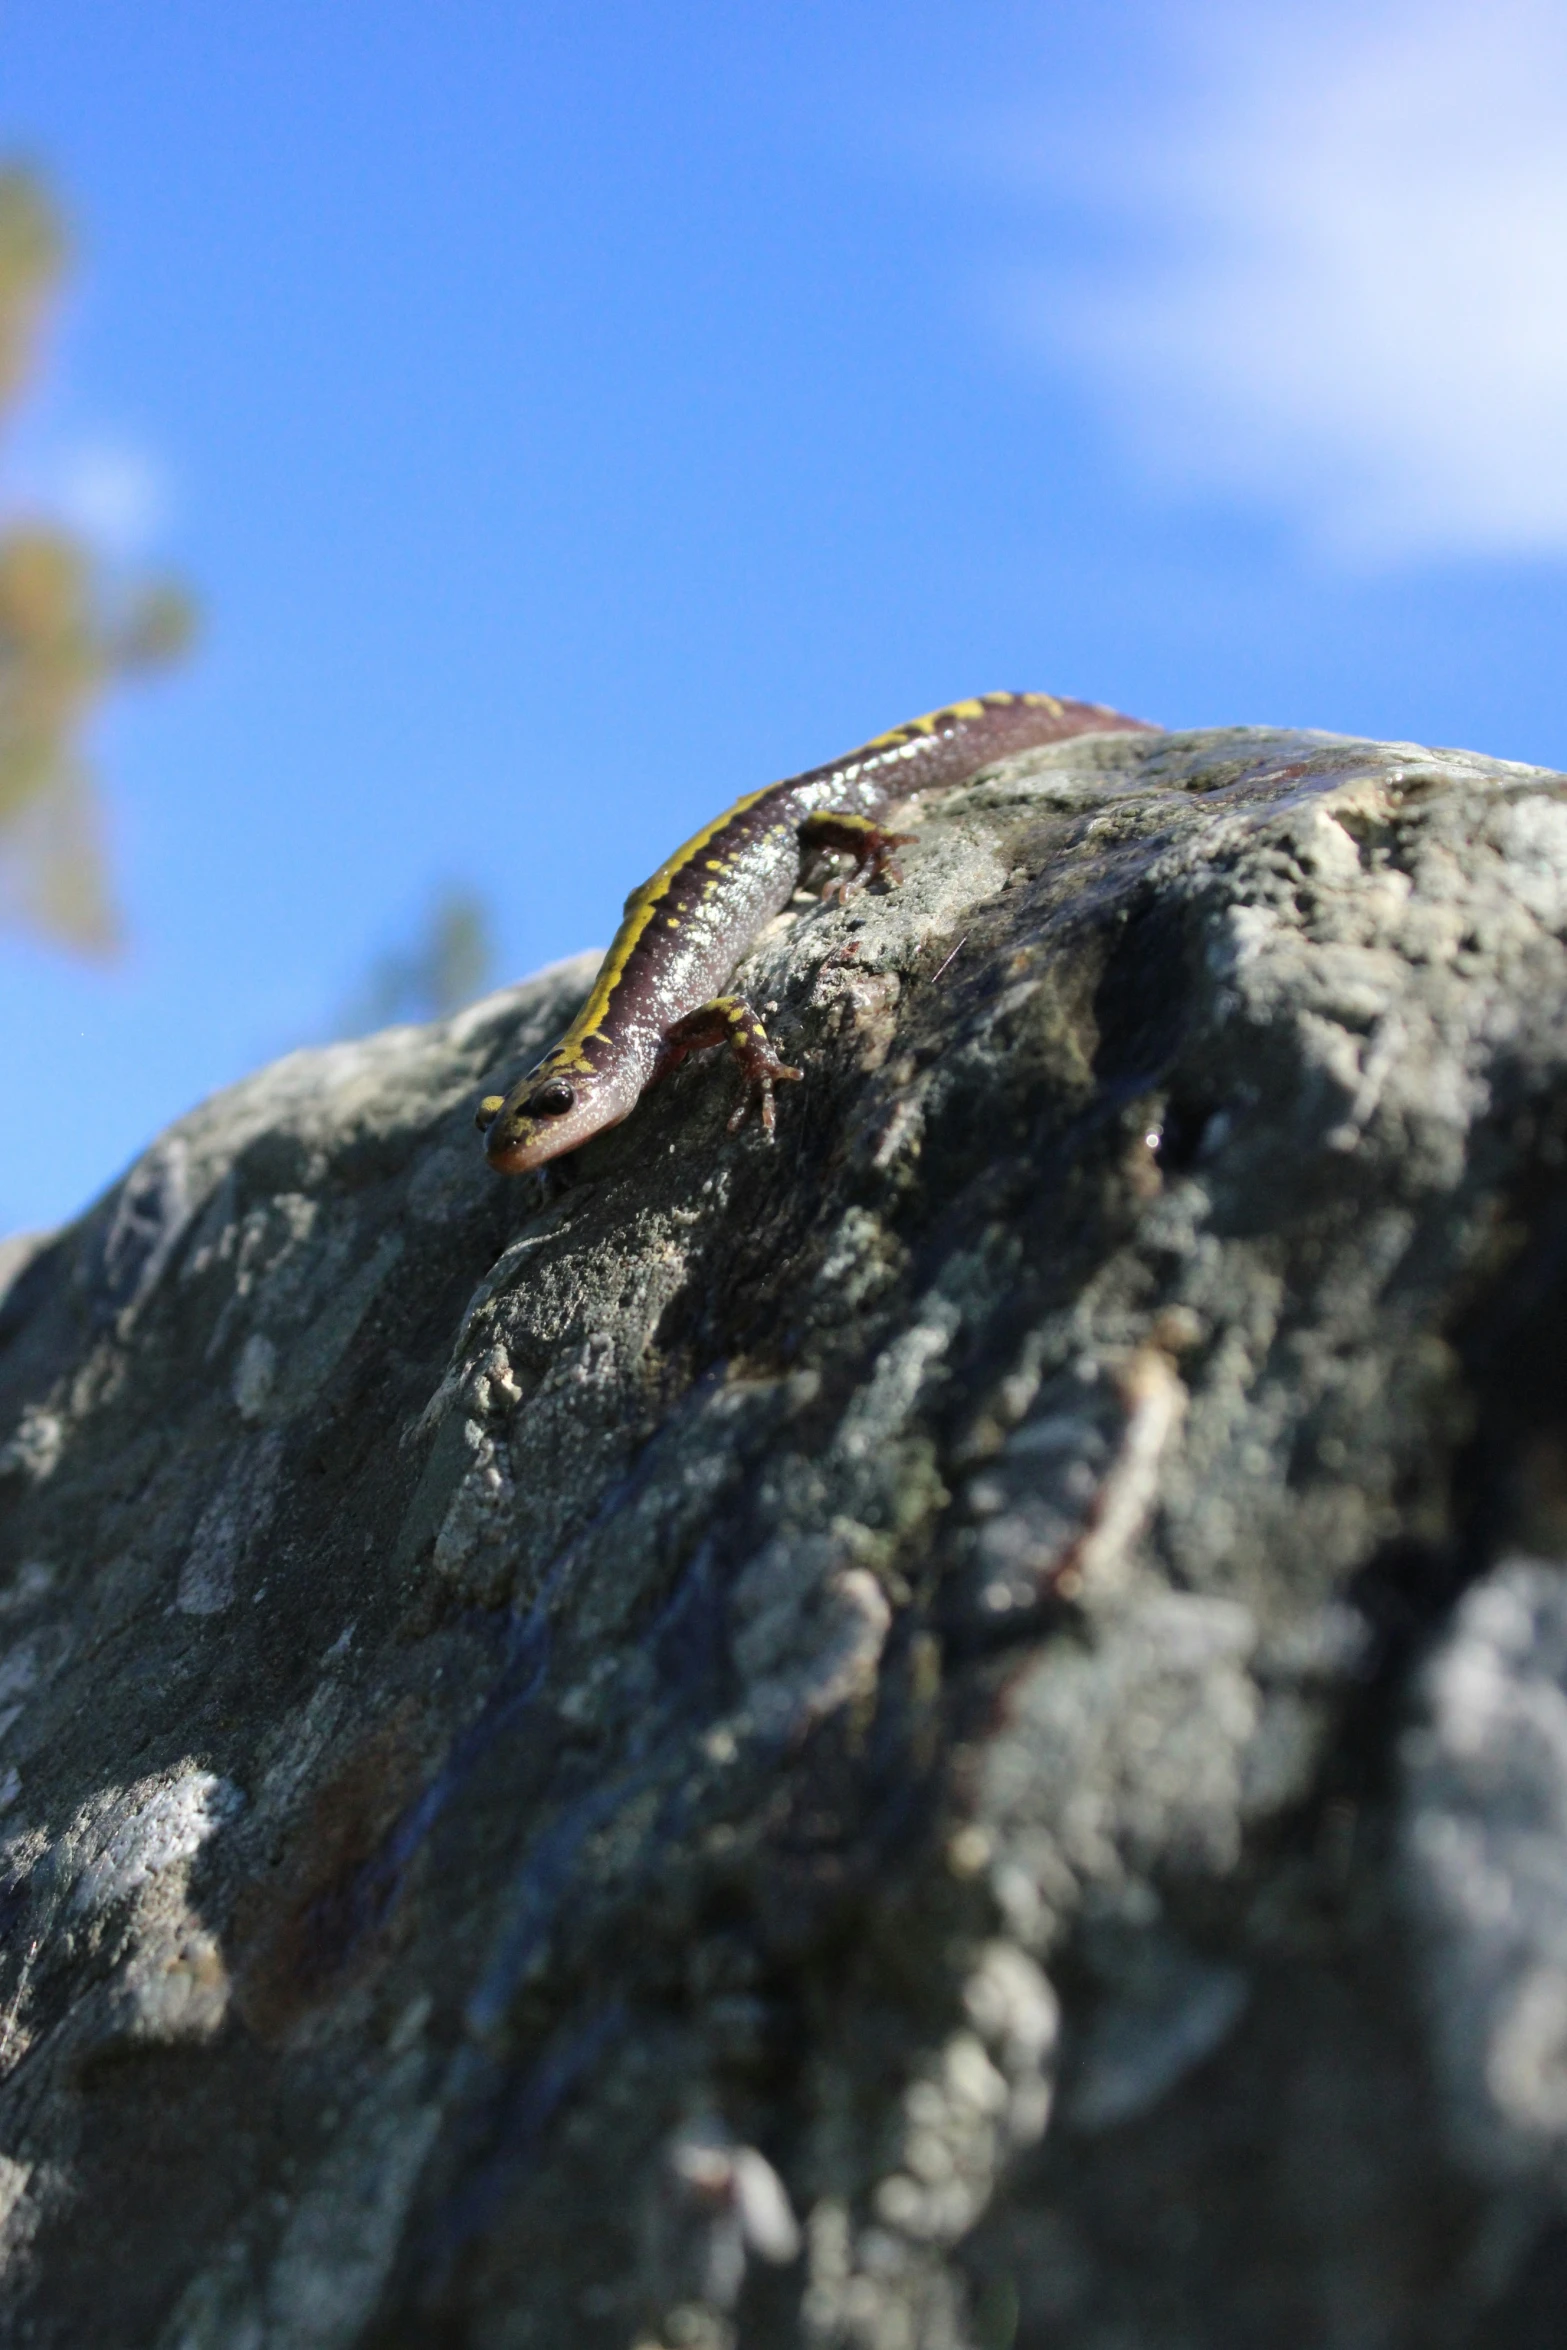 a small lizard on the rocky surface on a sunny day